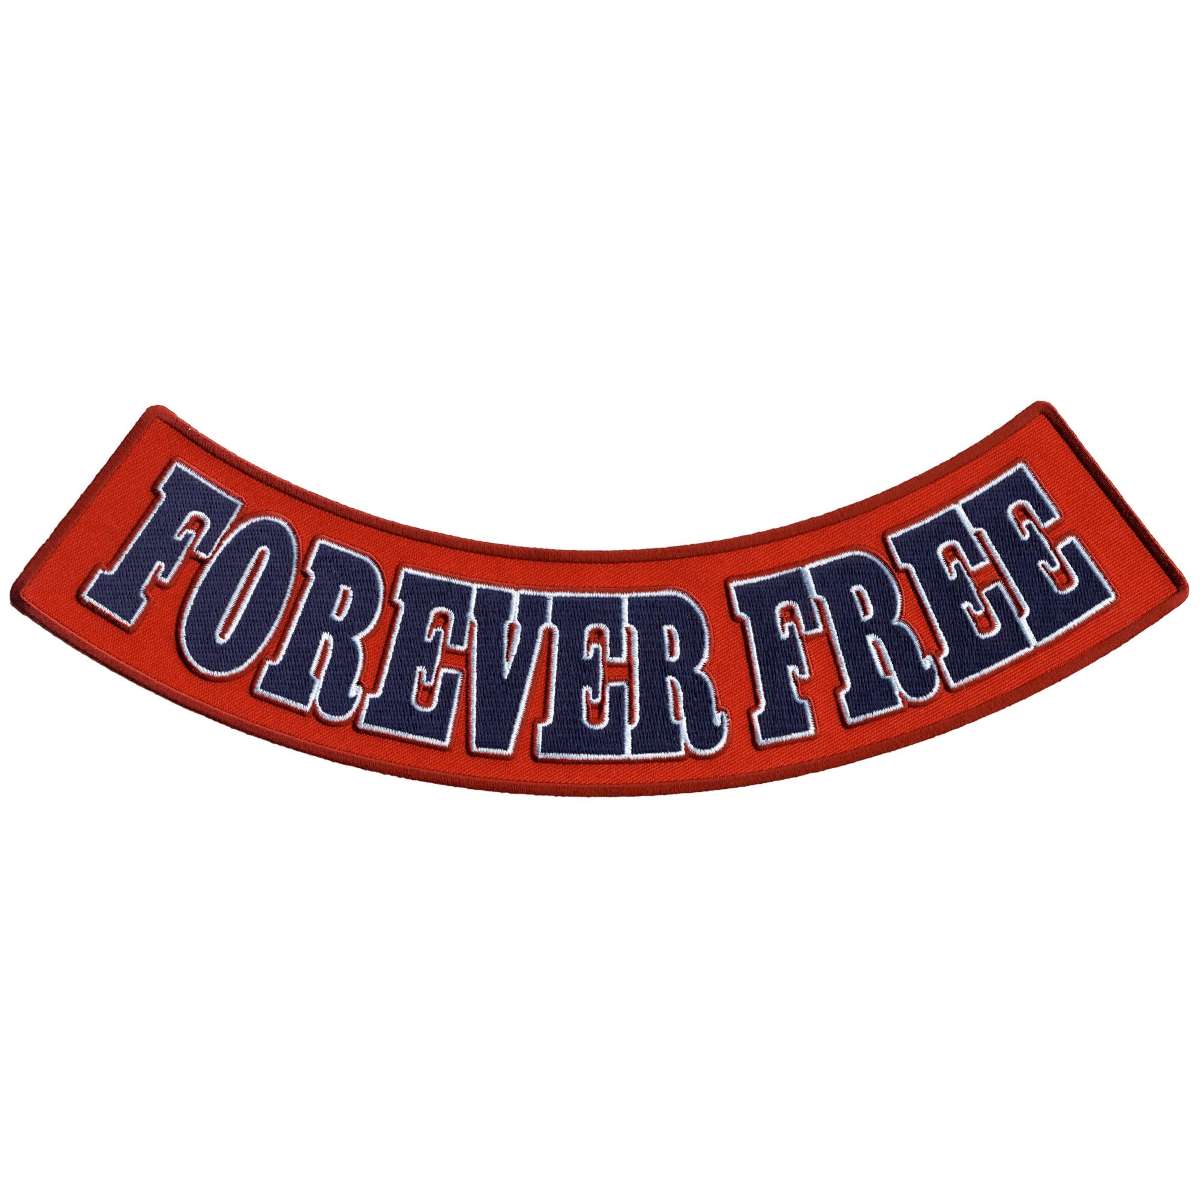 Hot Leathers Forever Free 12" X 3" Bottom Rocker Patch PPM5189